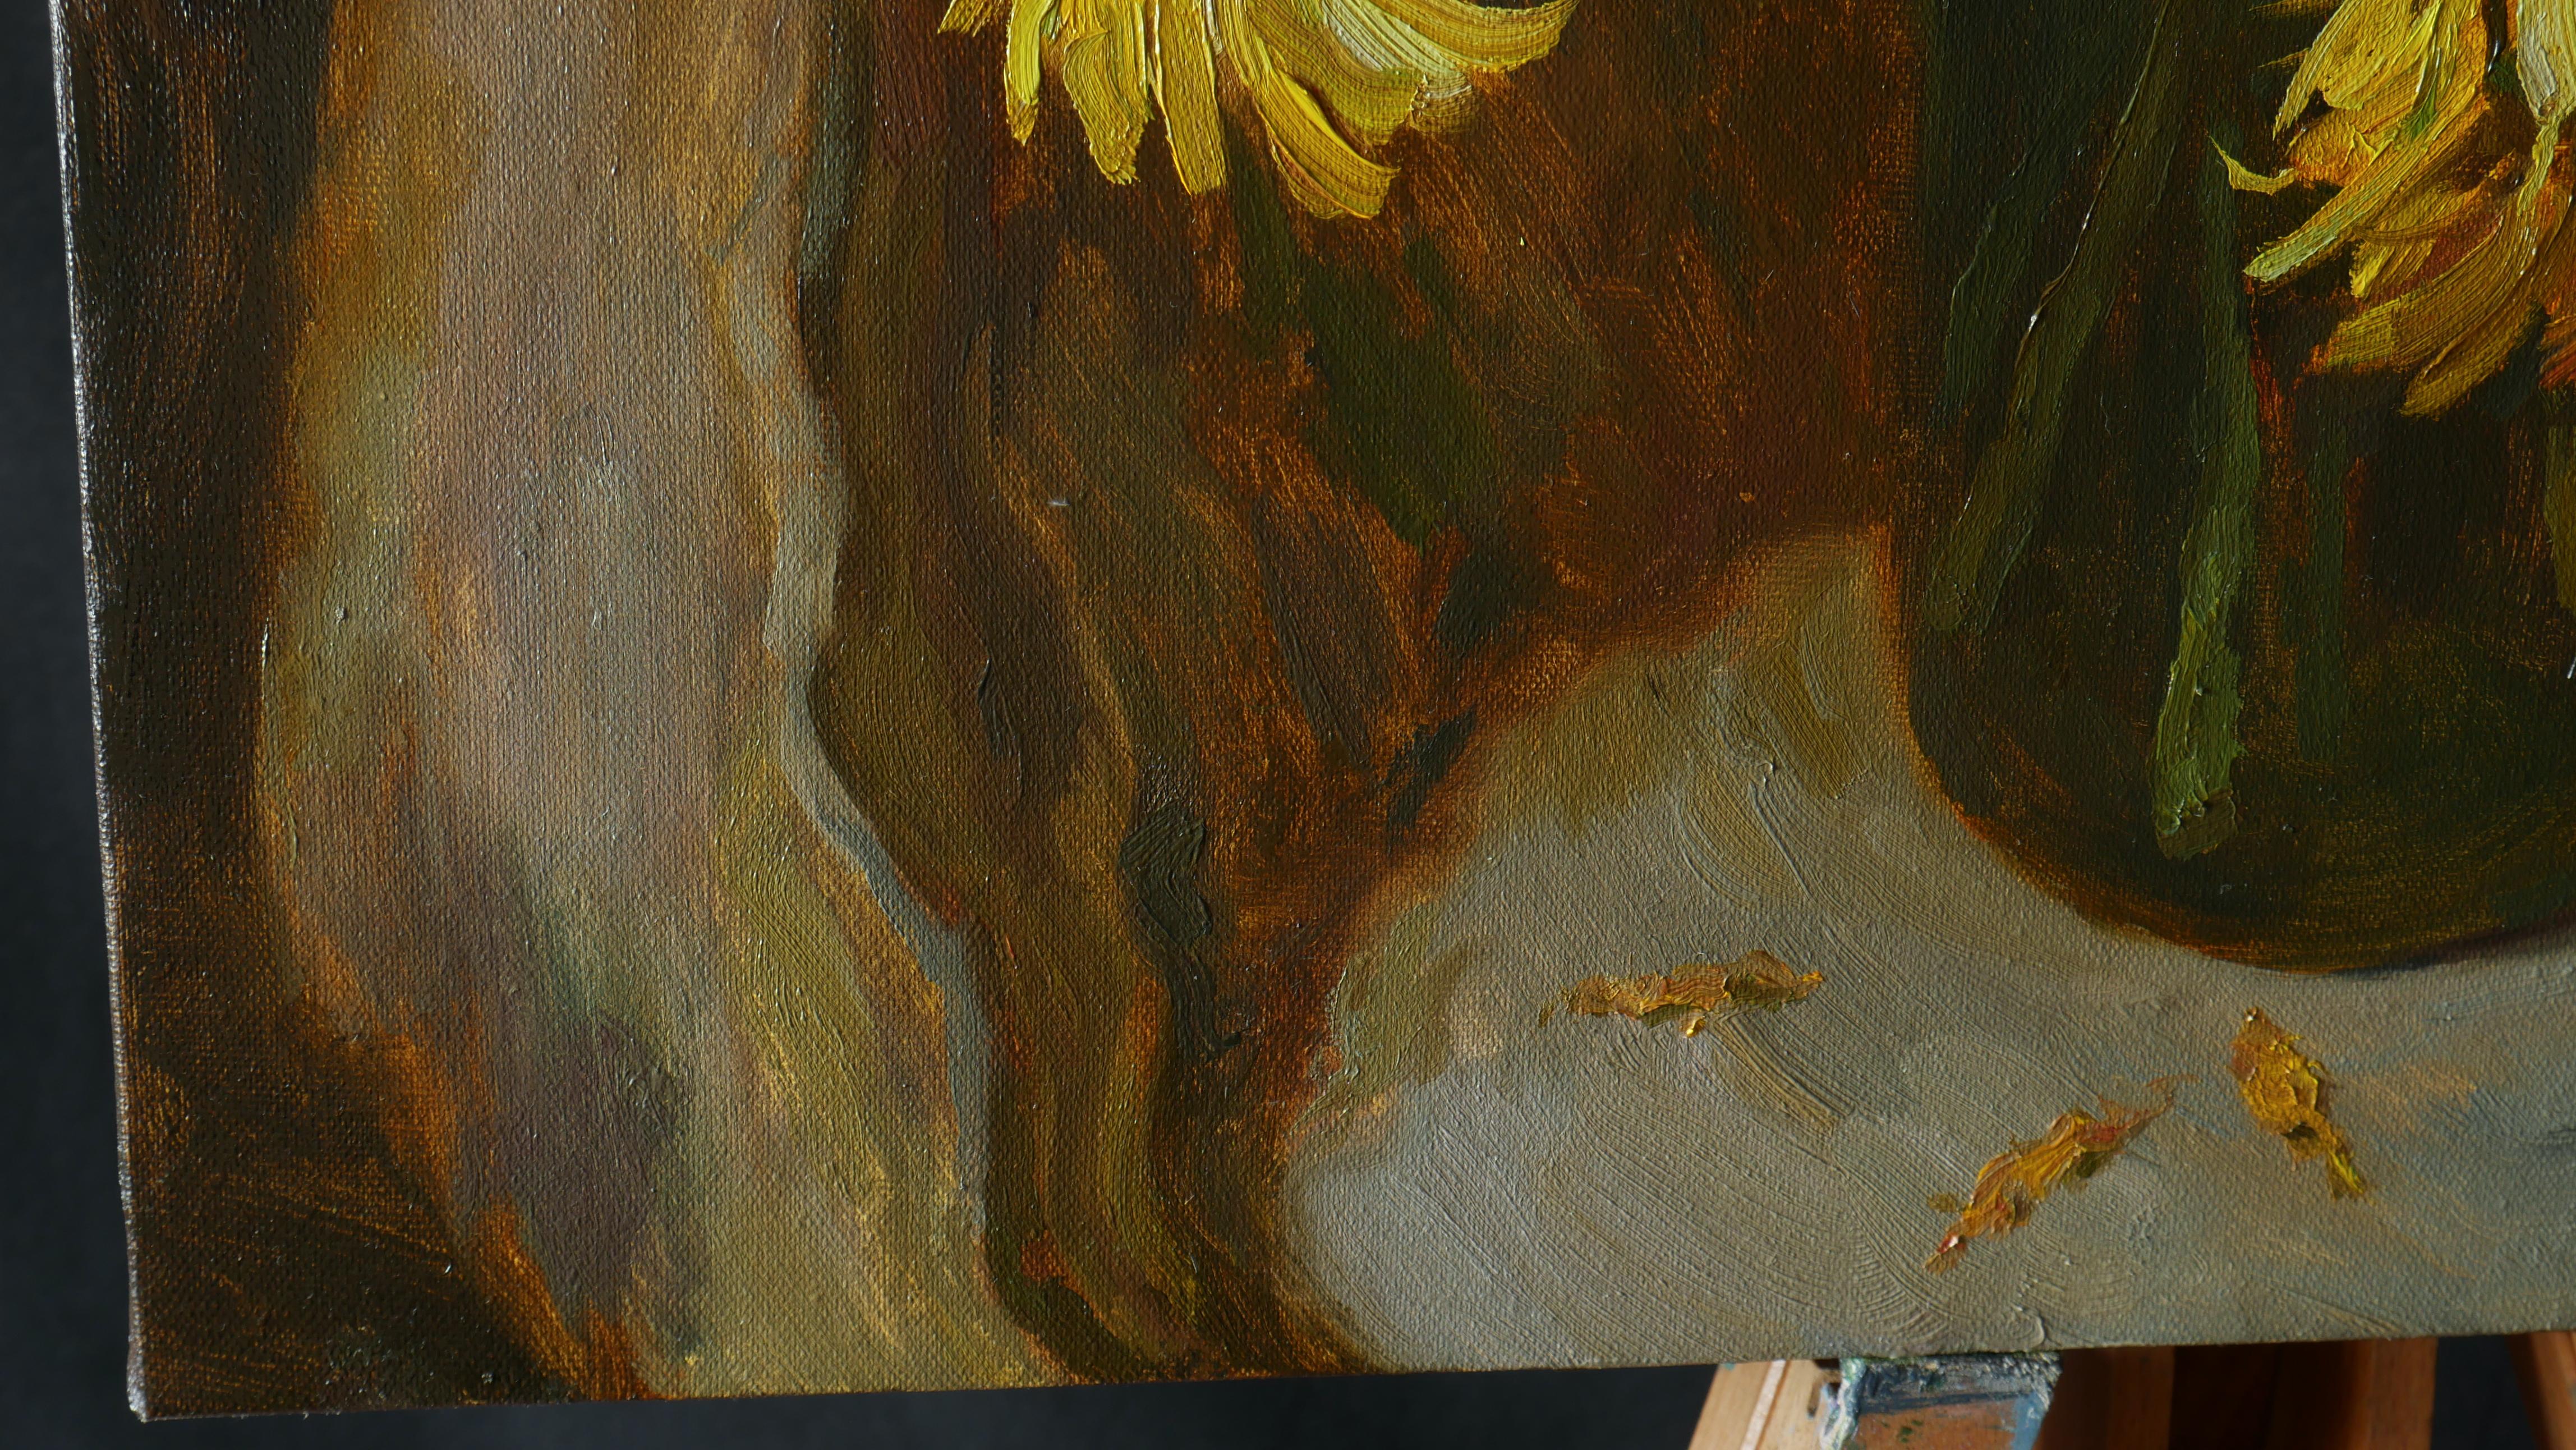 Sunflowers Near The Blue Curtain - sunflowers still life painting For Sale 5